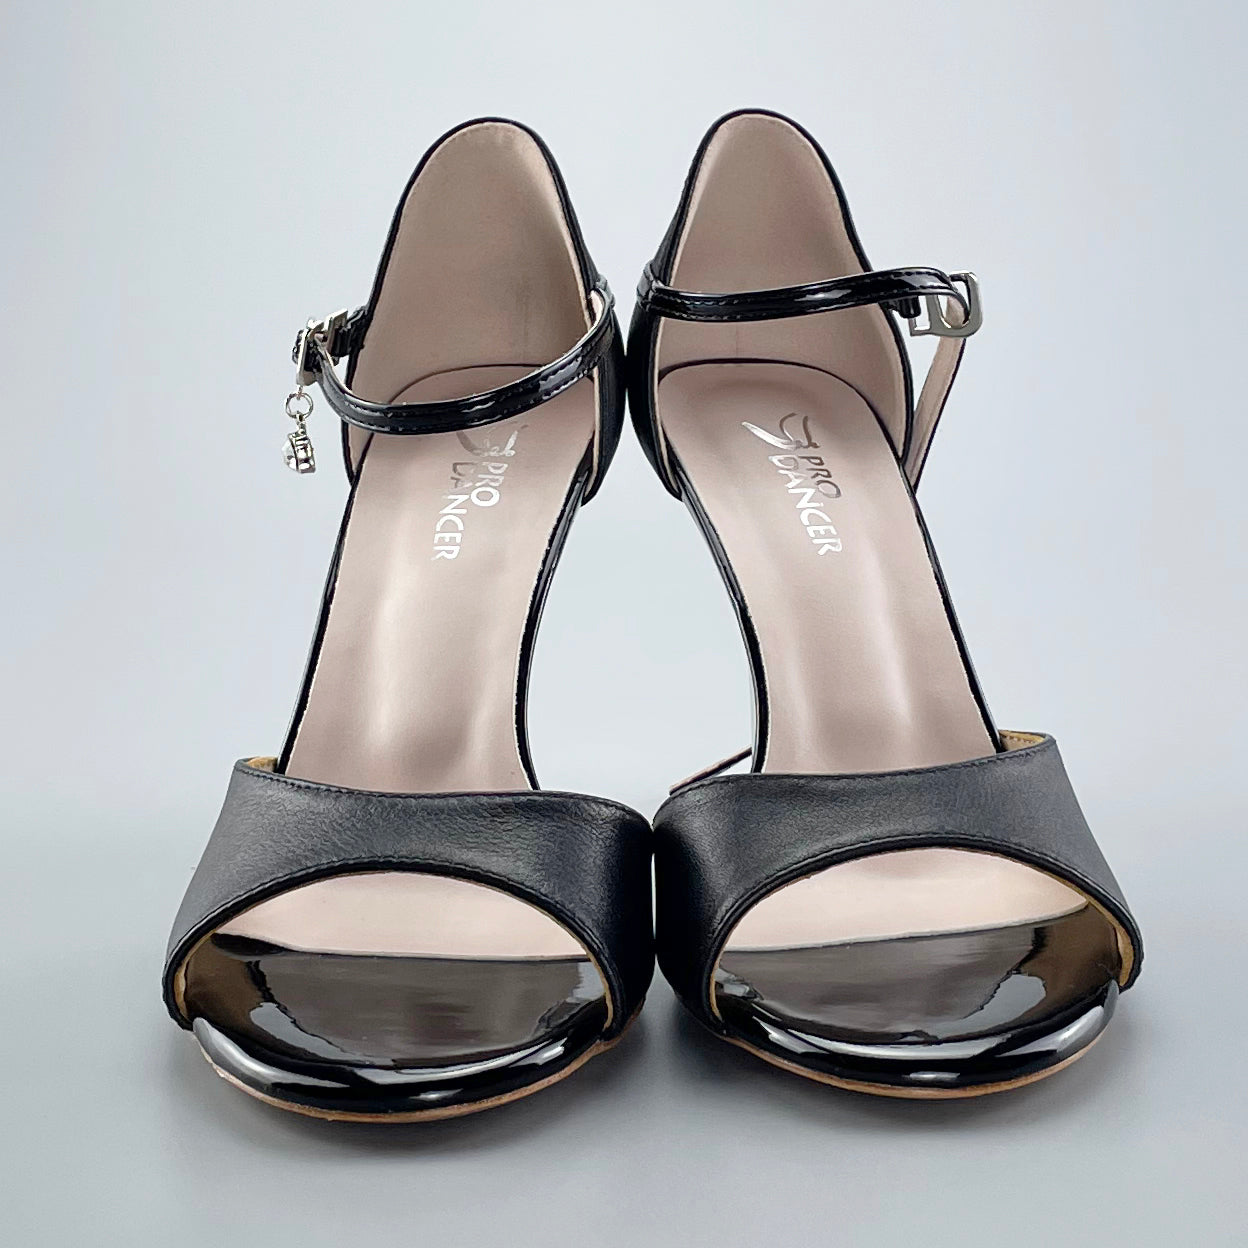 Pro Dancer Open-toe and Closed-back Argentine Tango Shoes High Salsa Heels Hard Leather Sole Black (PD-9042A)